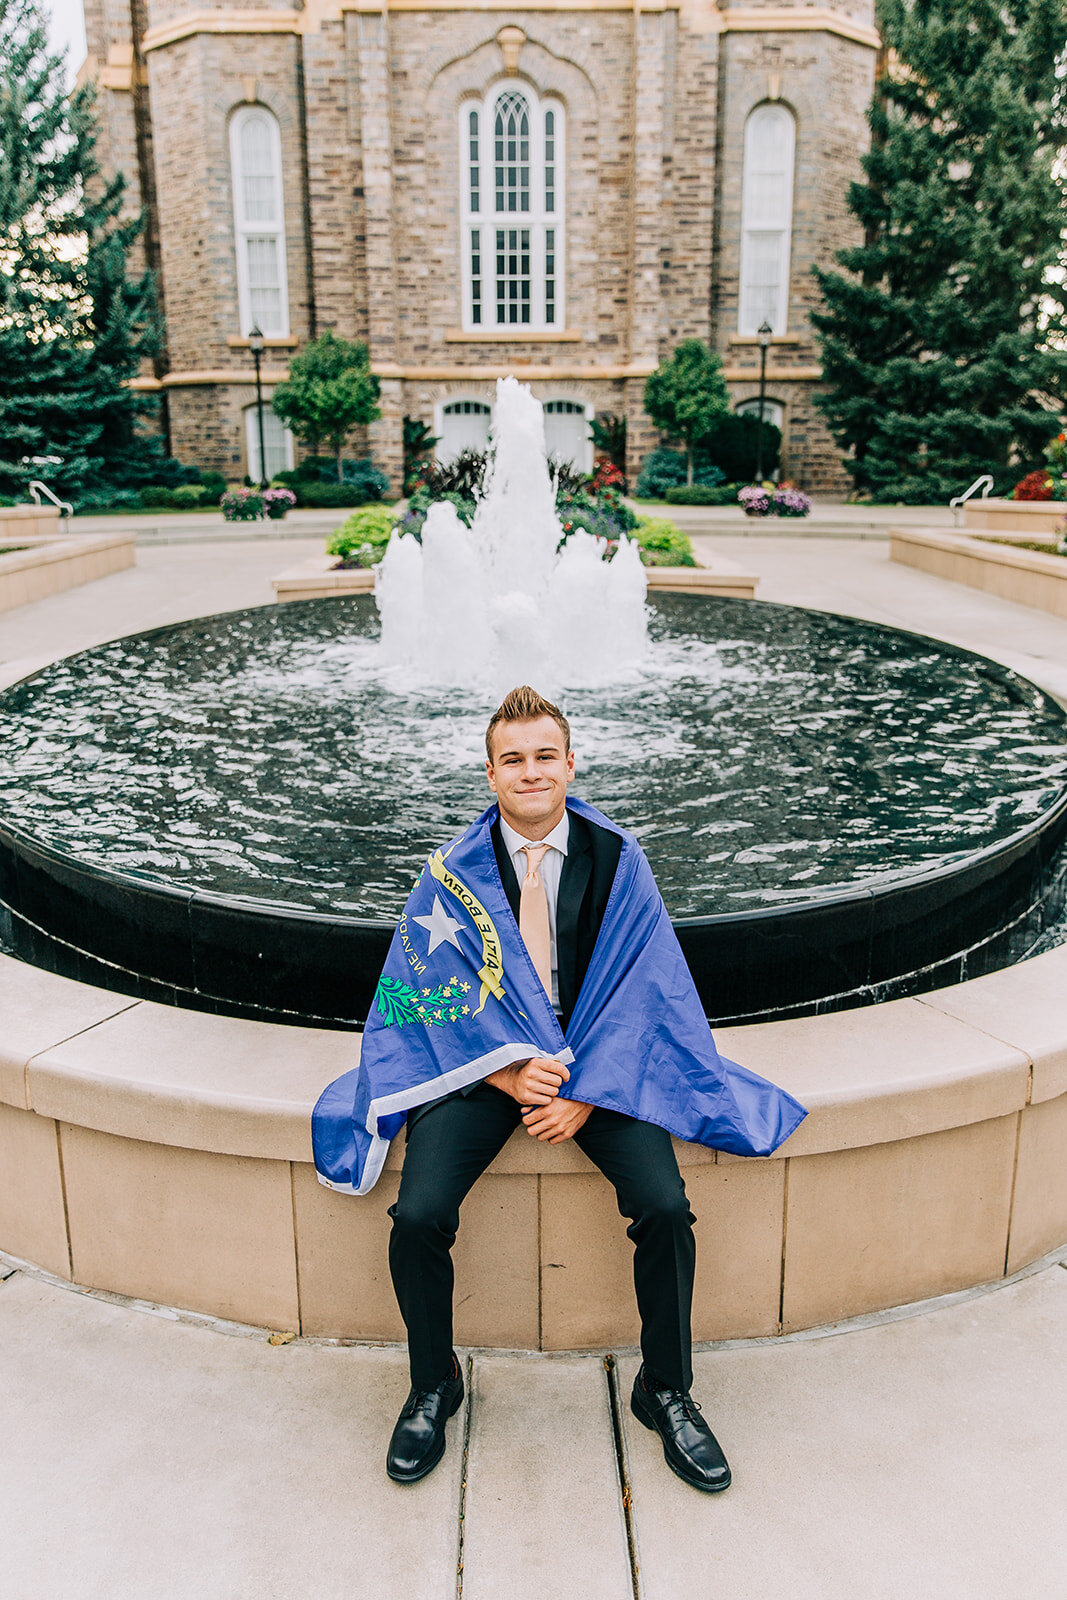  las vegas nevada missionary state flag for nevada missionary photos at the temple logan utah sitting at the fountain black suit called to serve lds missionary headshots professional portraits of a new elder bella alder photography #bellaalderphoto #